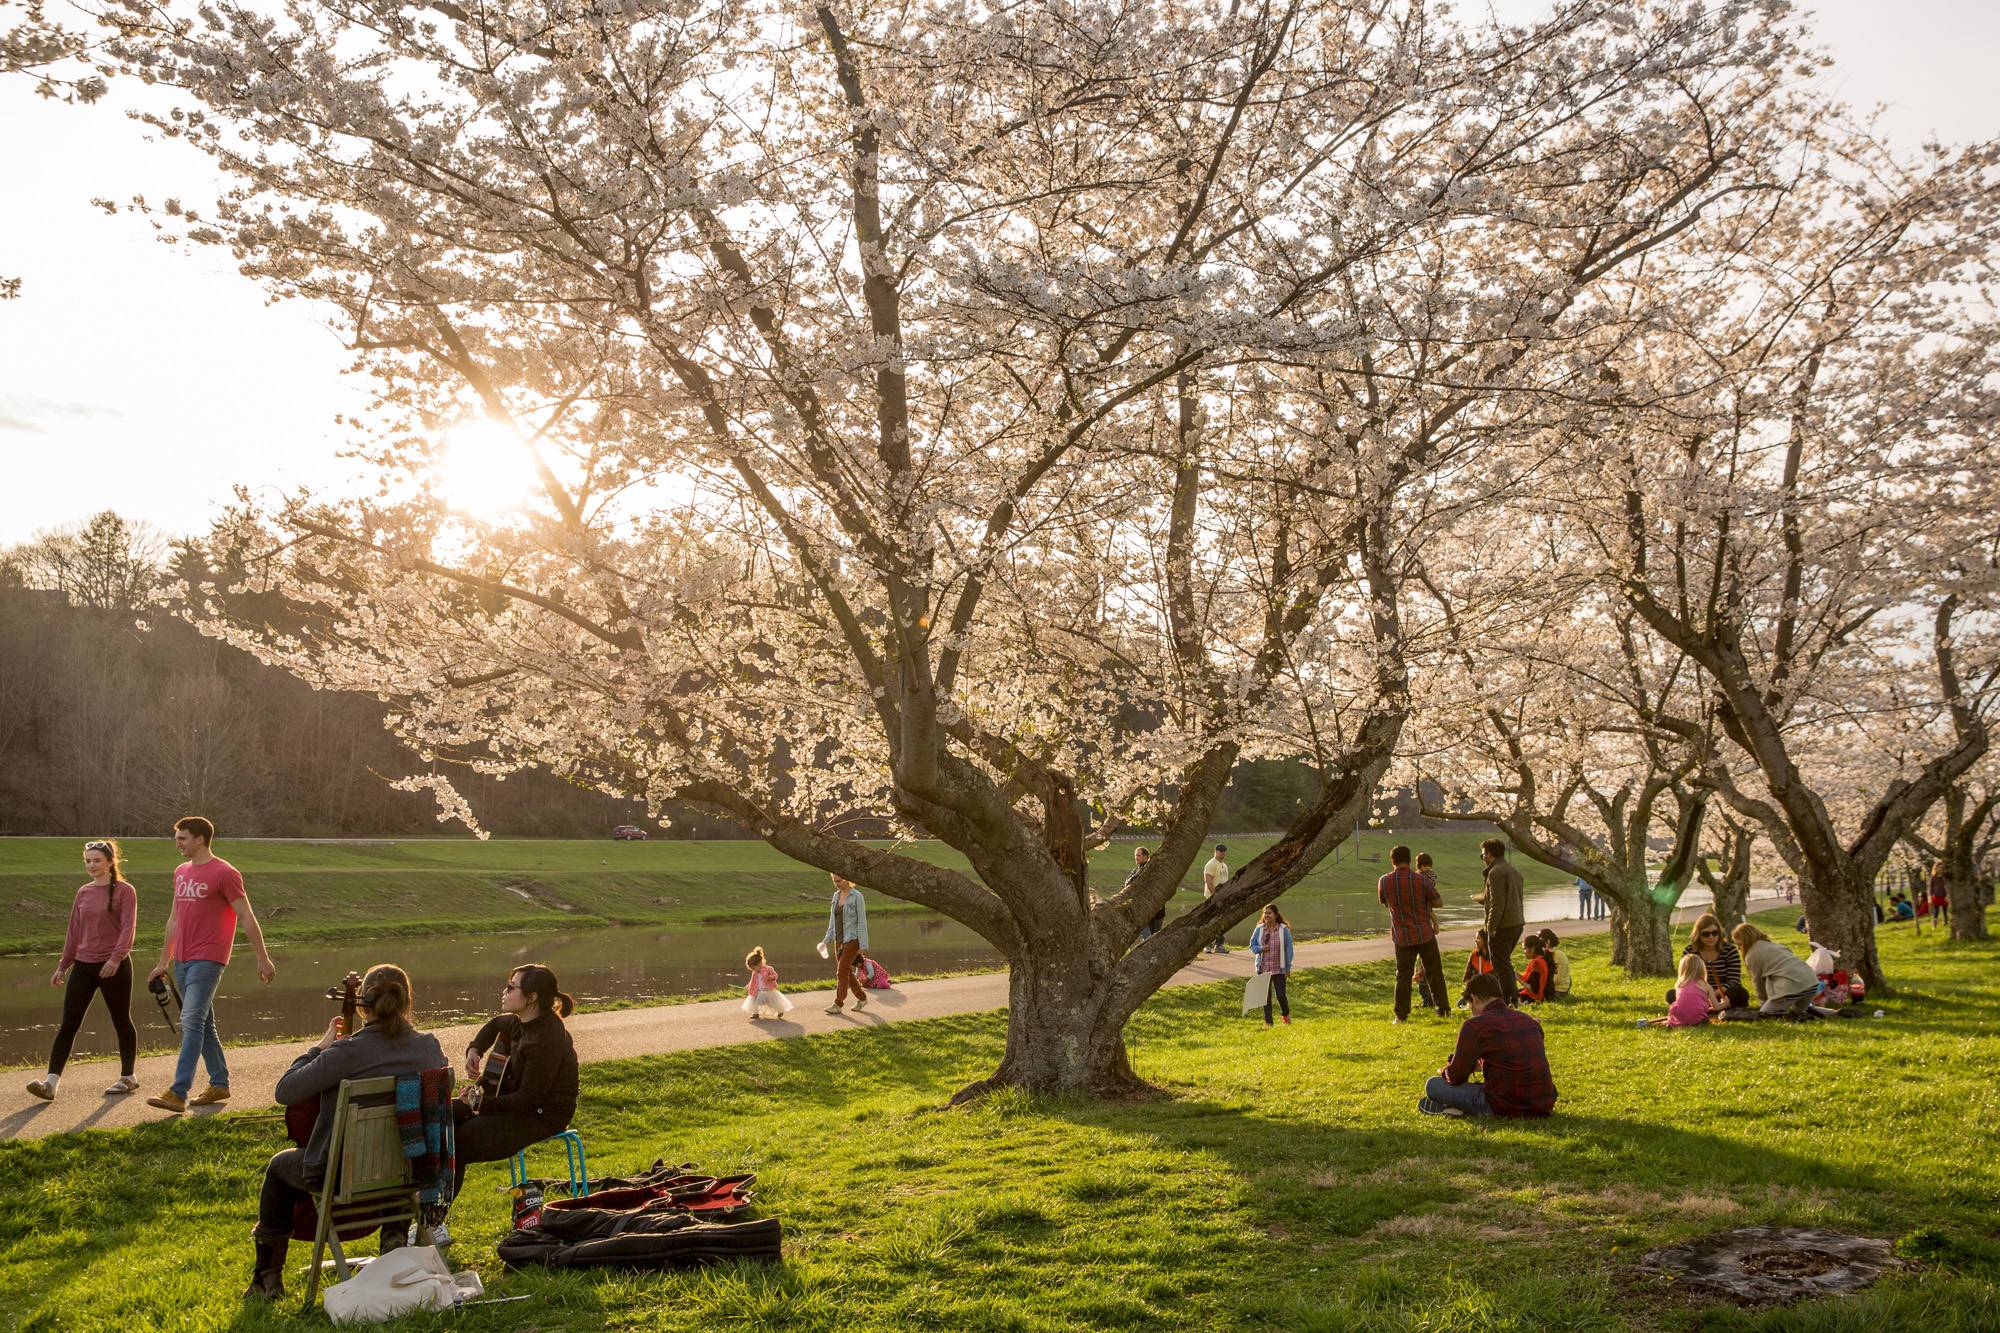 Photo of Japanese cherry trees at Ohio University along the Hocking River in Athens, Ohio. 6. Kayakers paddle at night at Stroud's Run State Park, just a few miles from the Ohio University campus. 